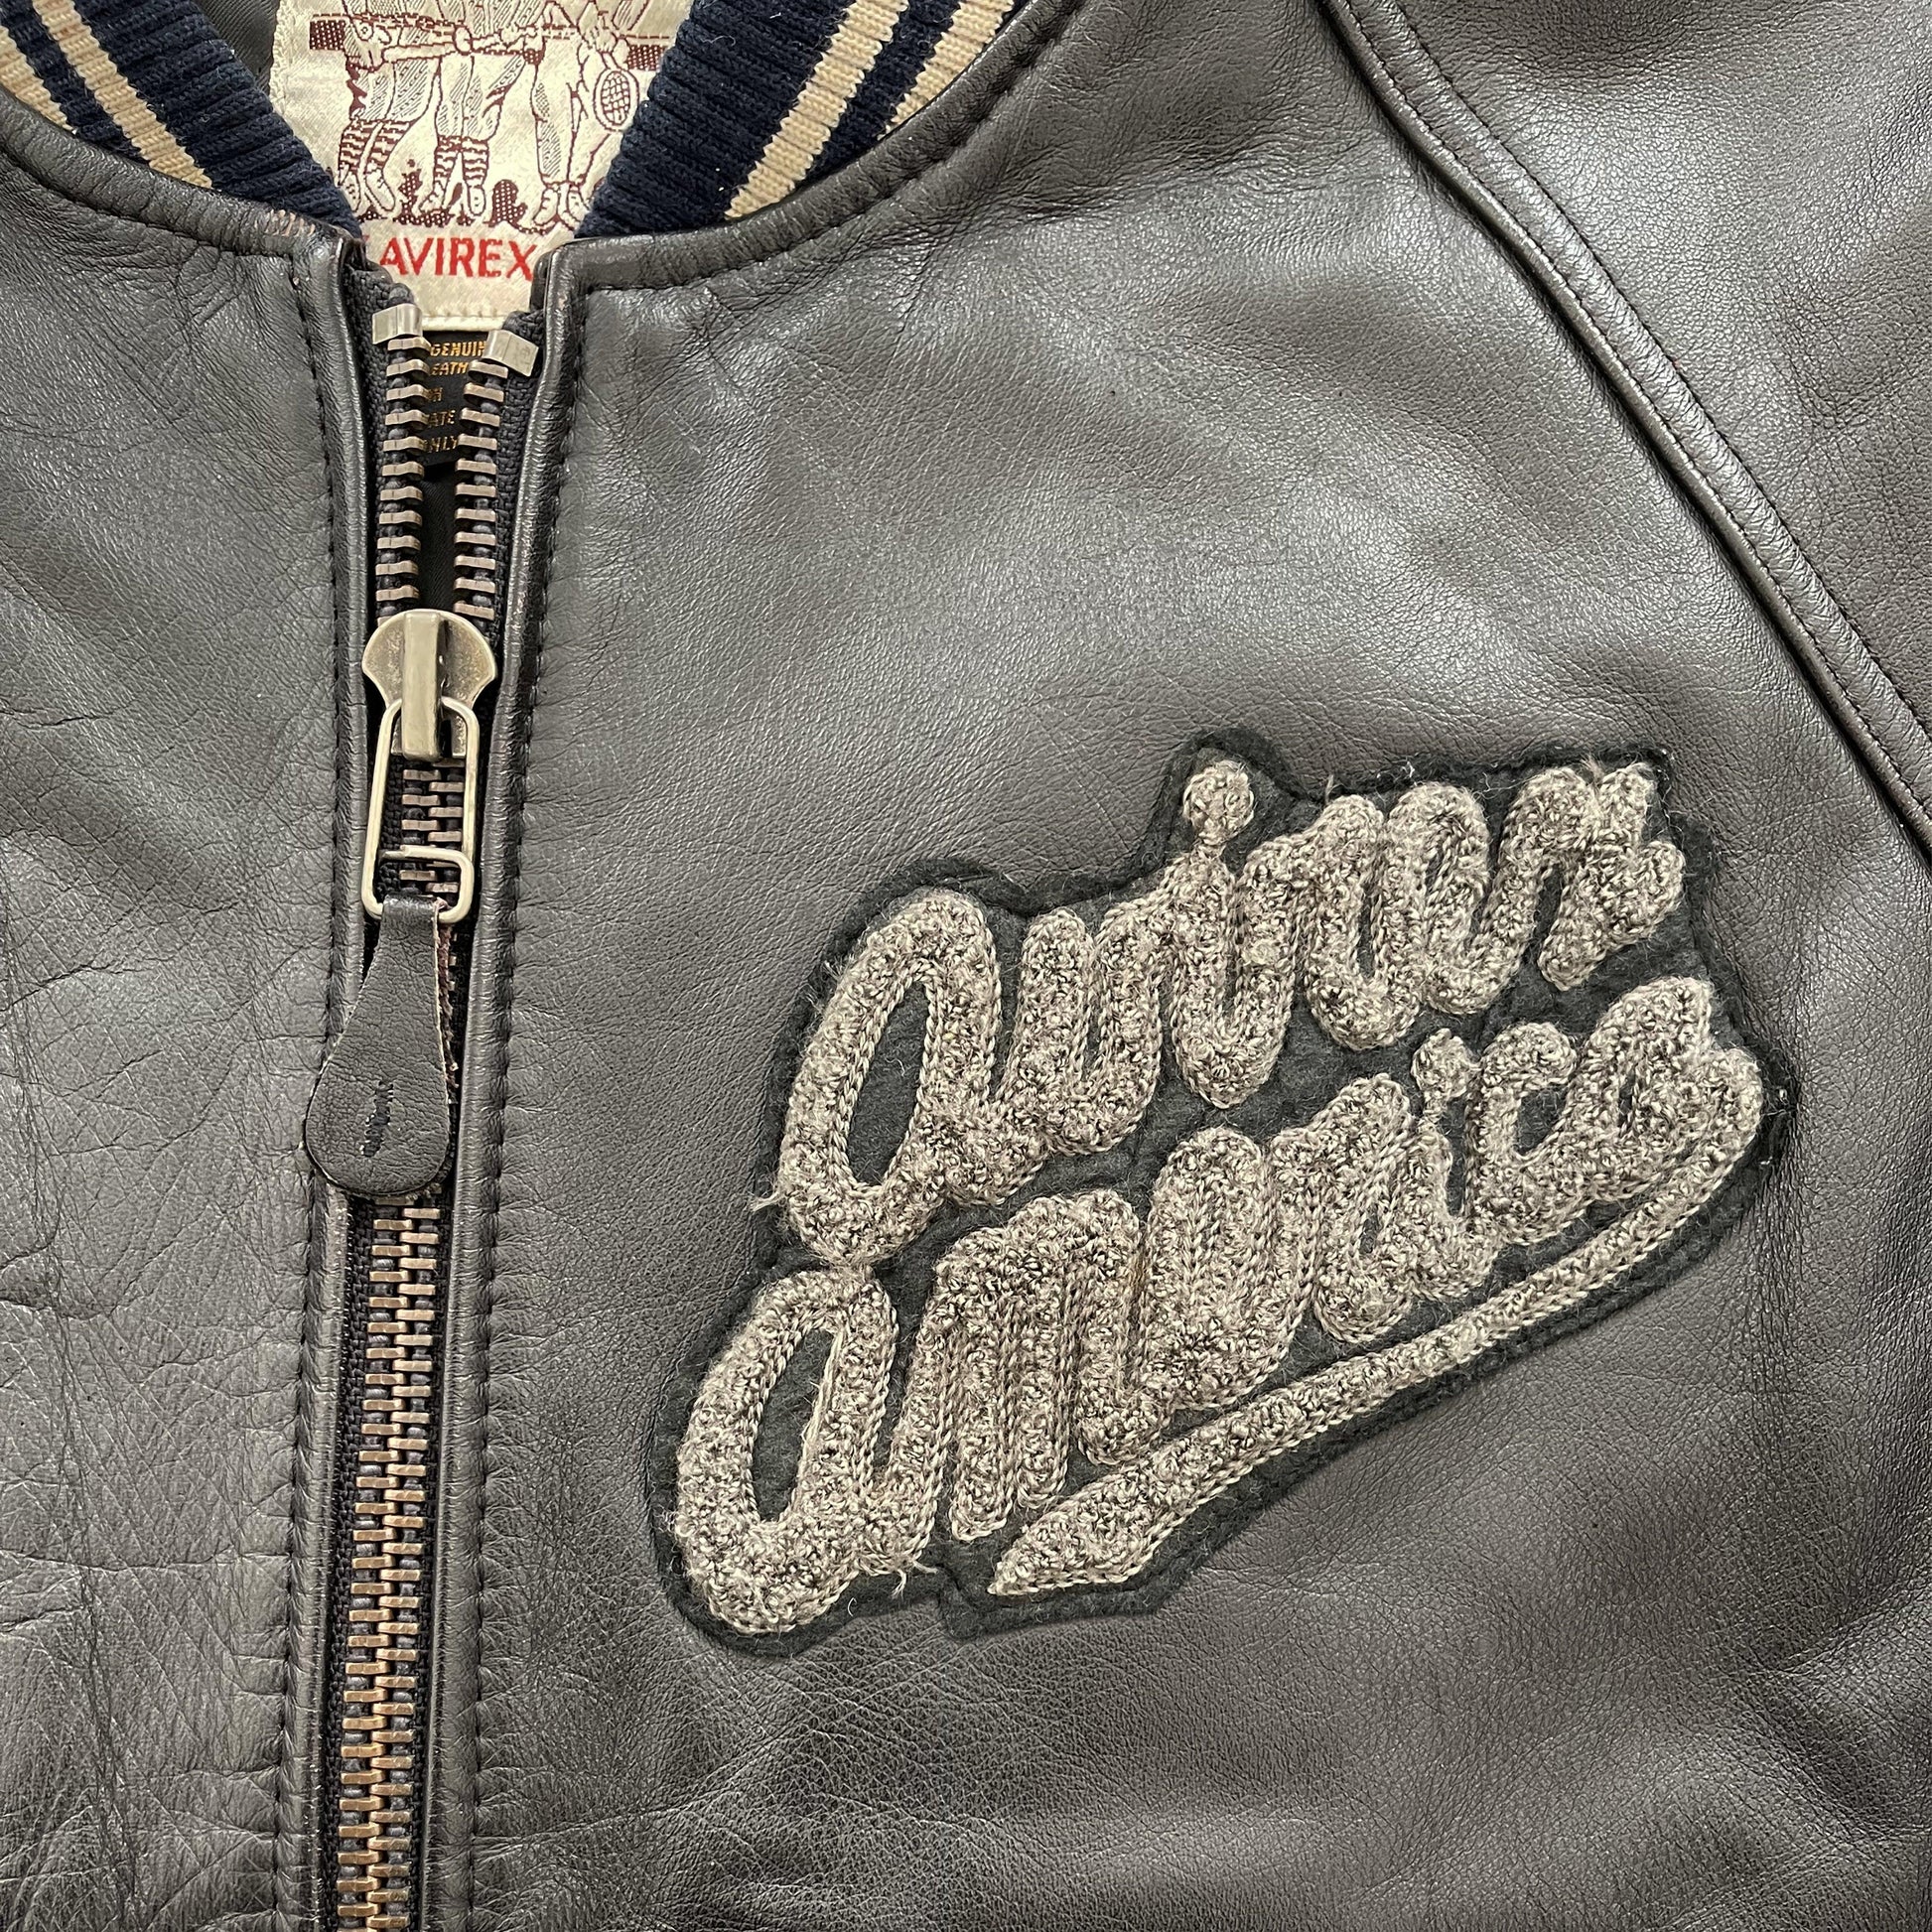 Avirex Leather Bomber Jacket - Known Source